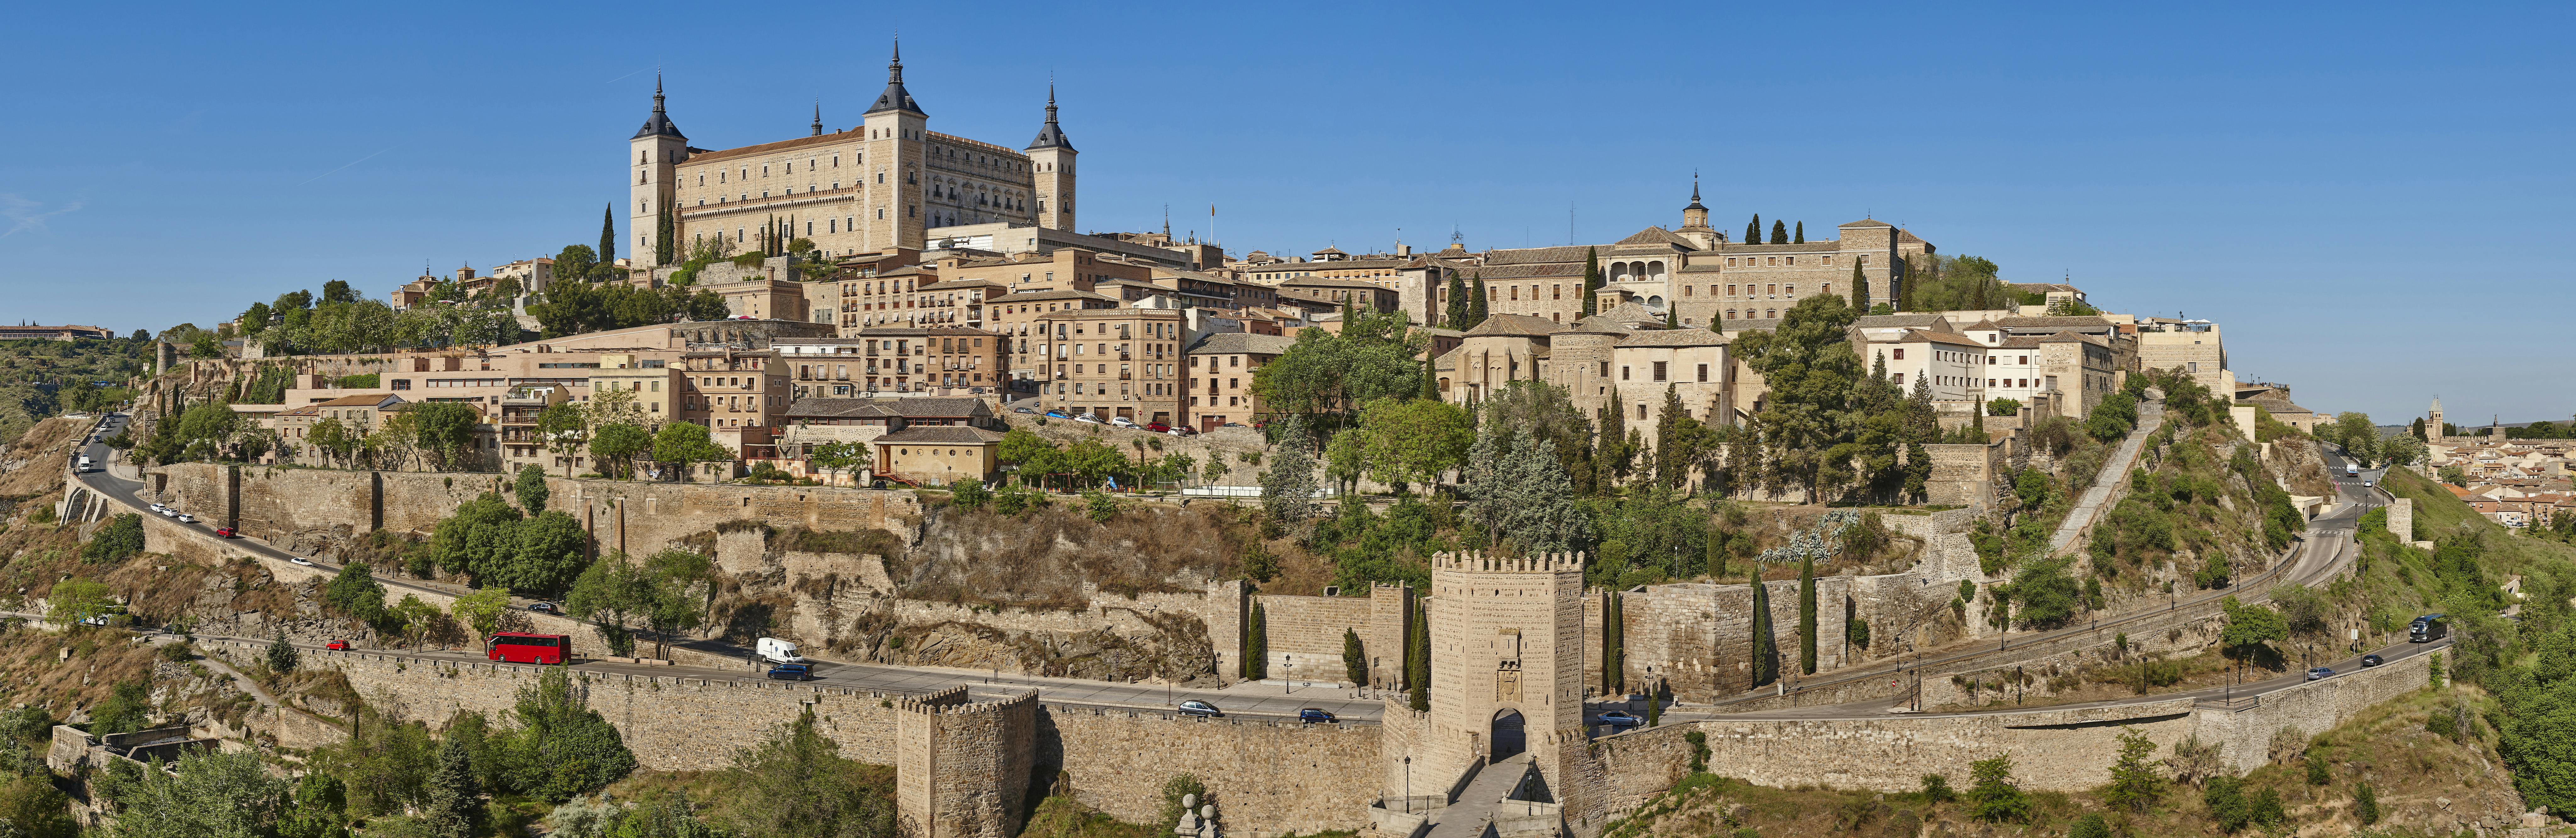 Toledo full day guided walking tour from Madrid Musement